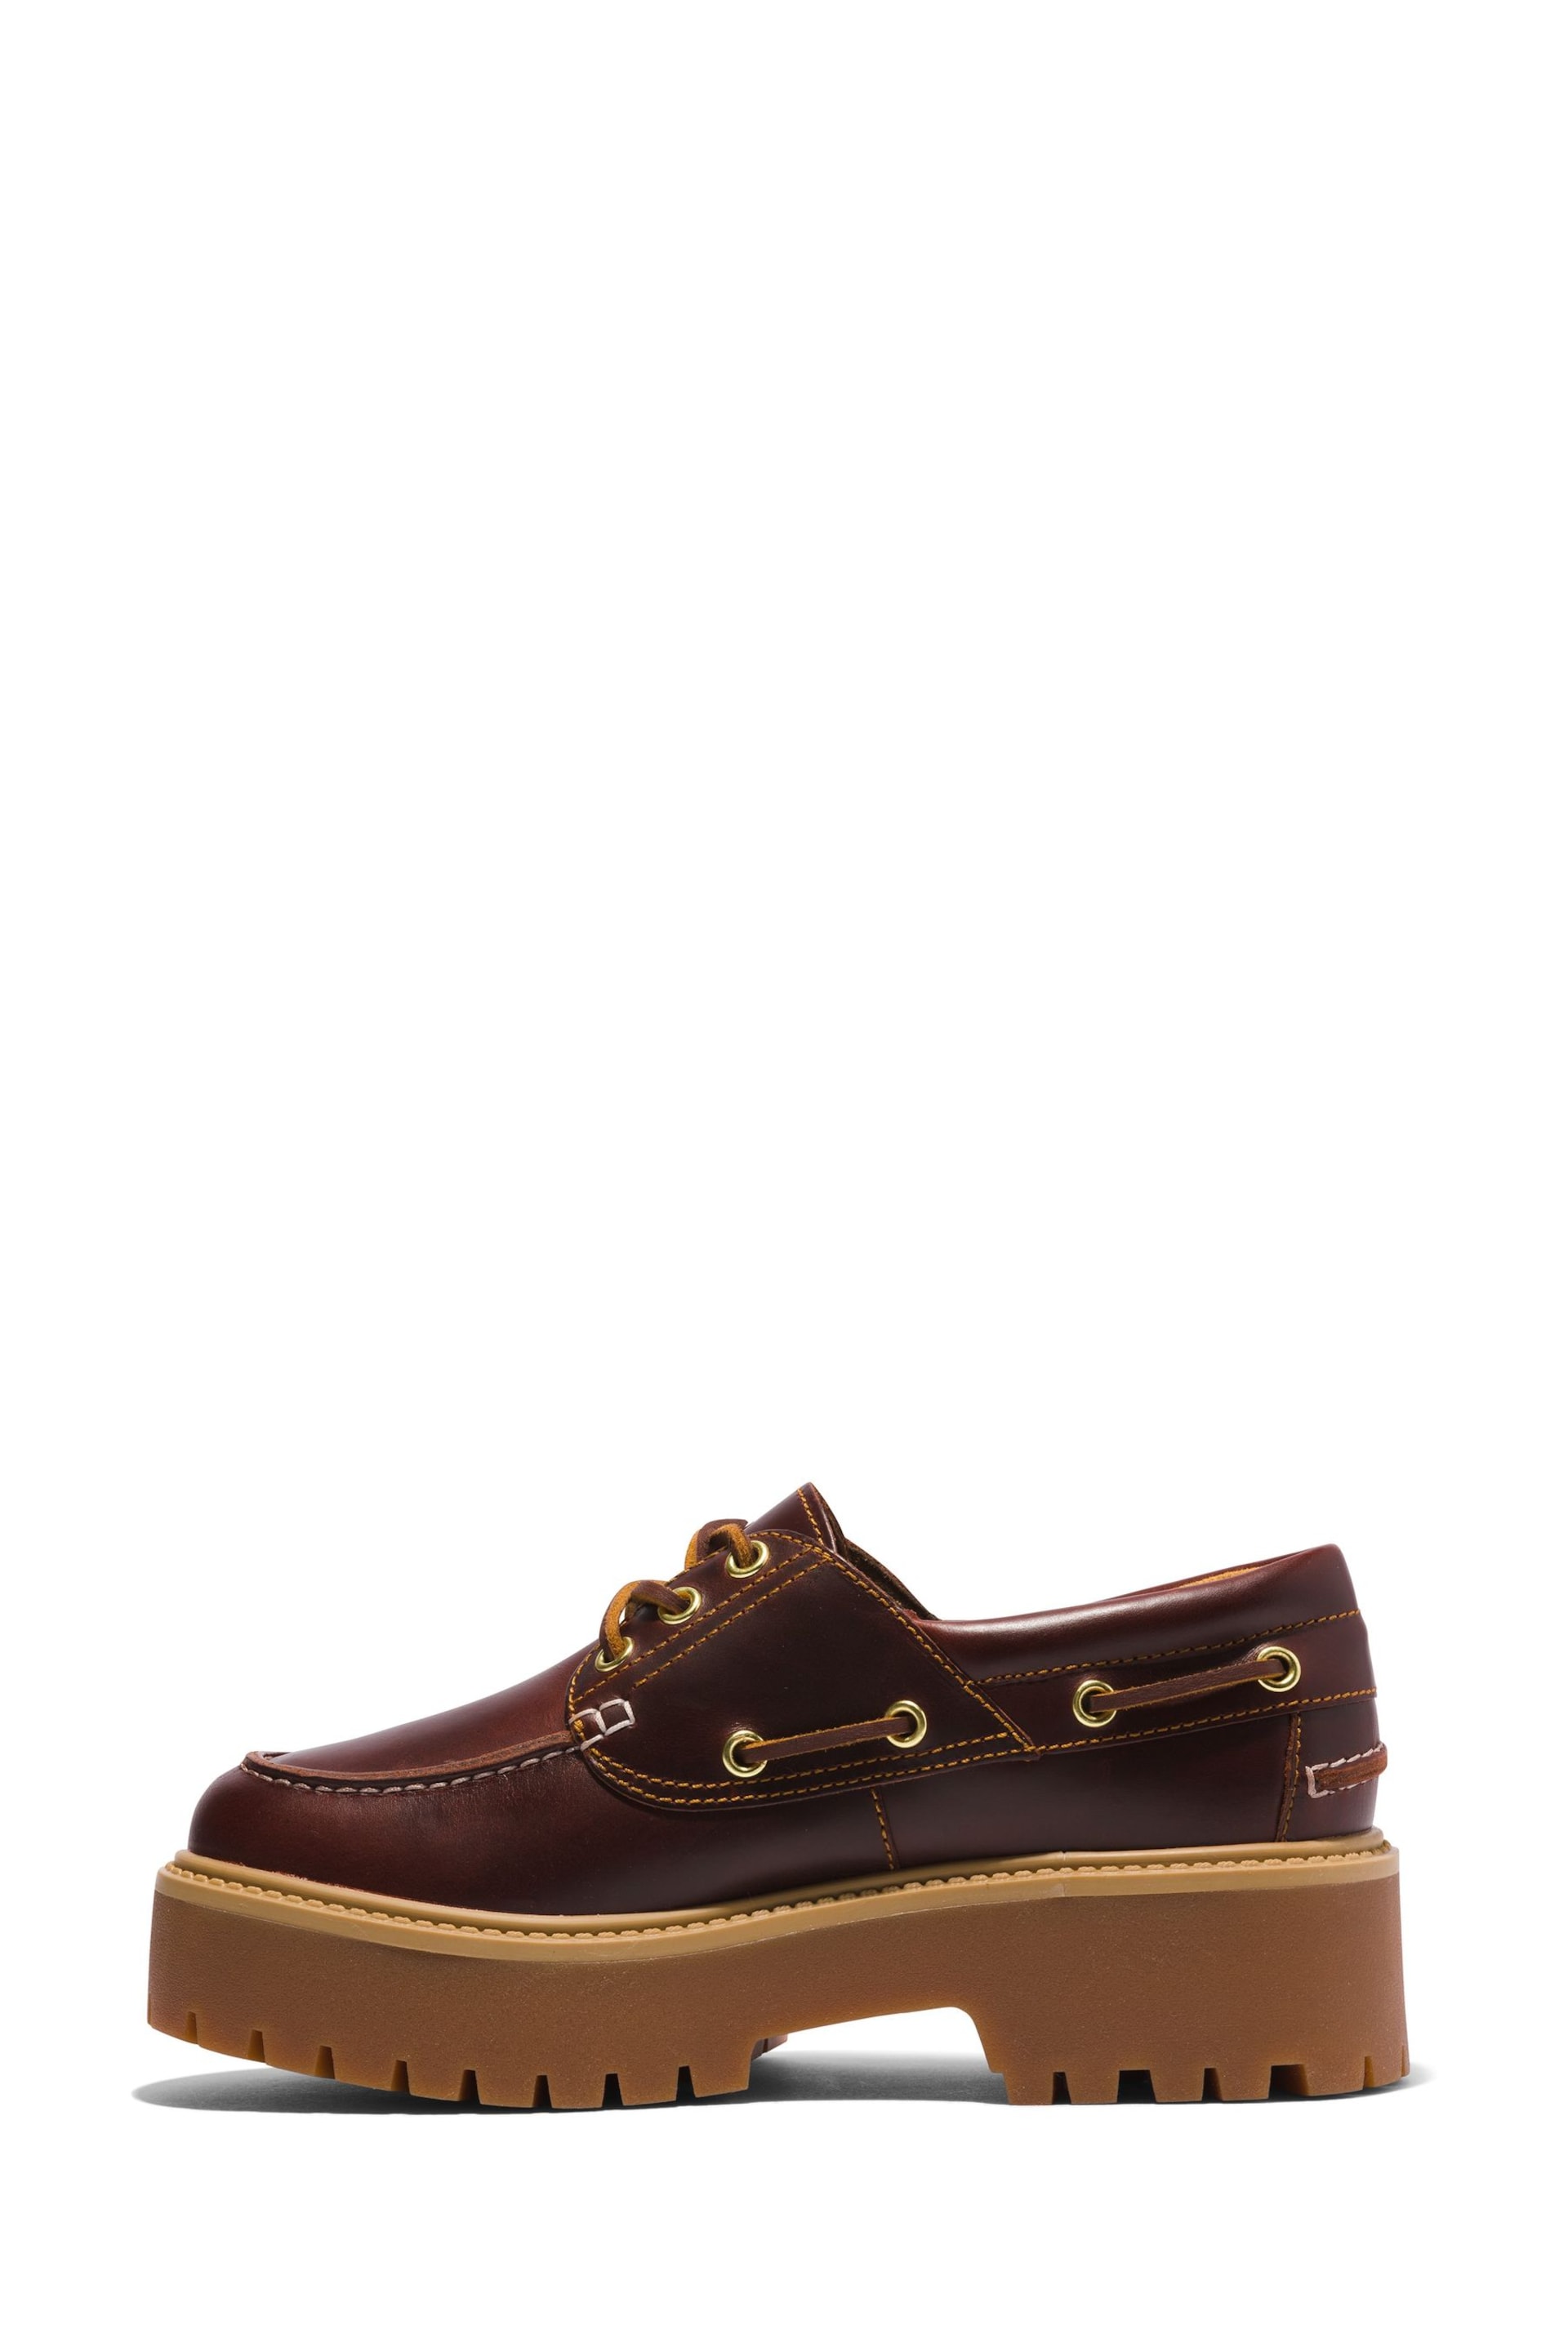 Timberland Street Boat Brown Shoes - Image 2 of 7